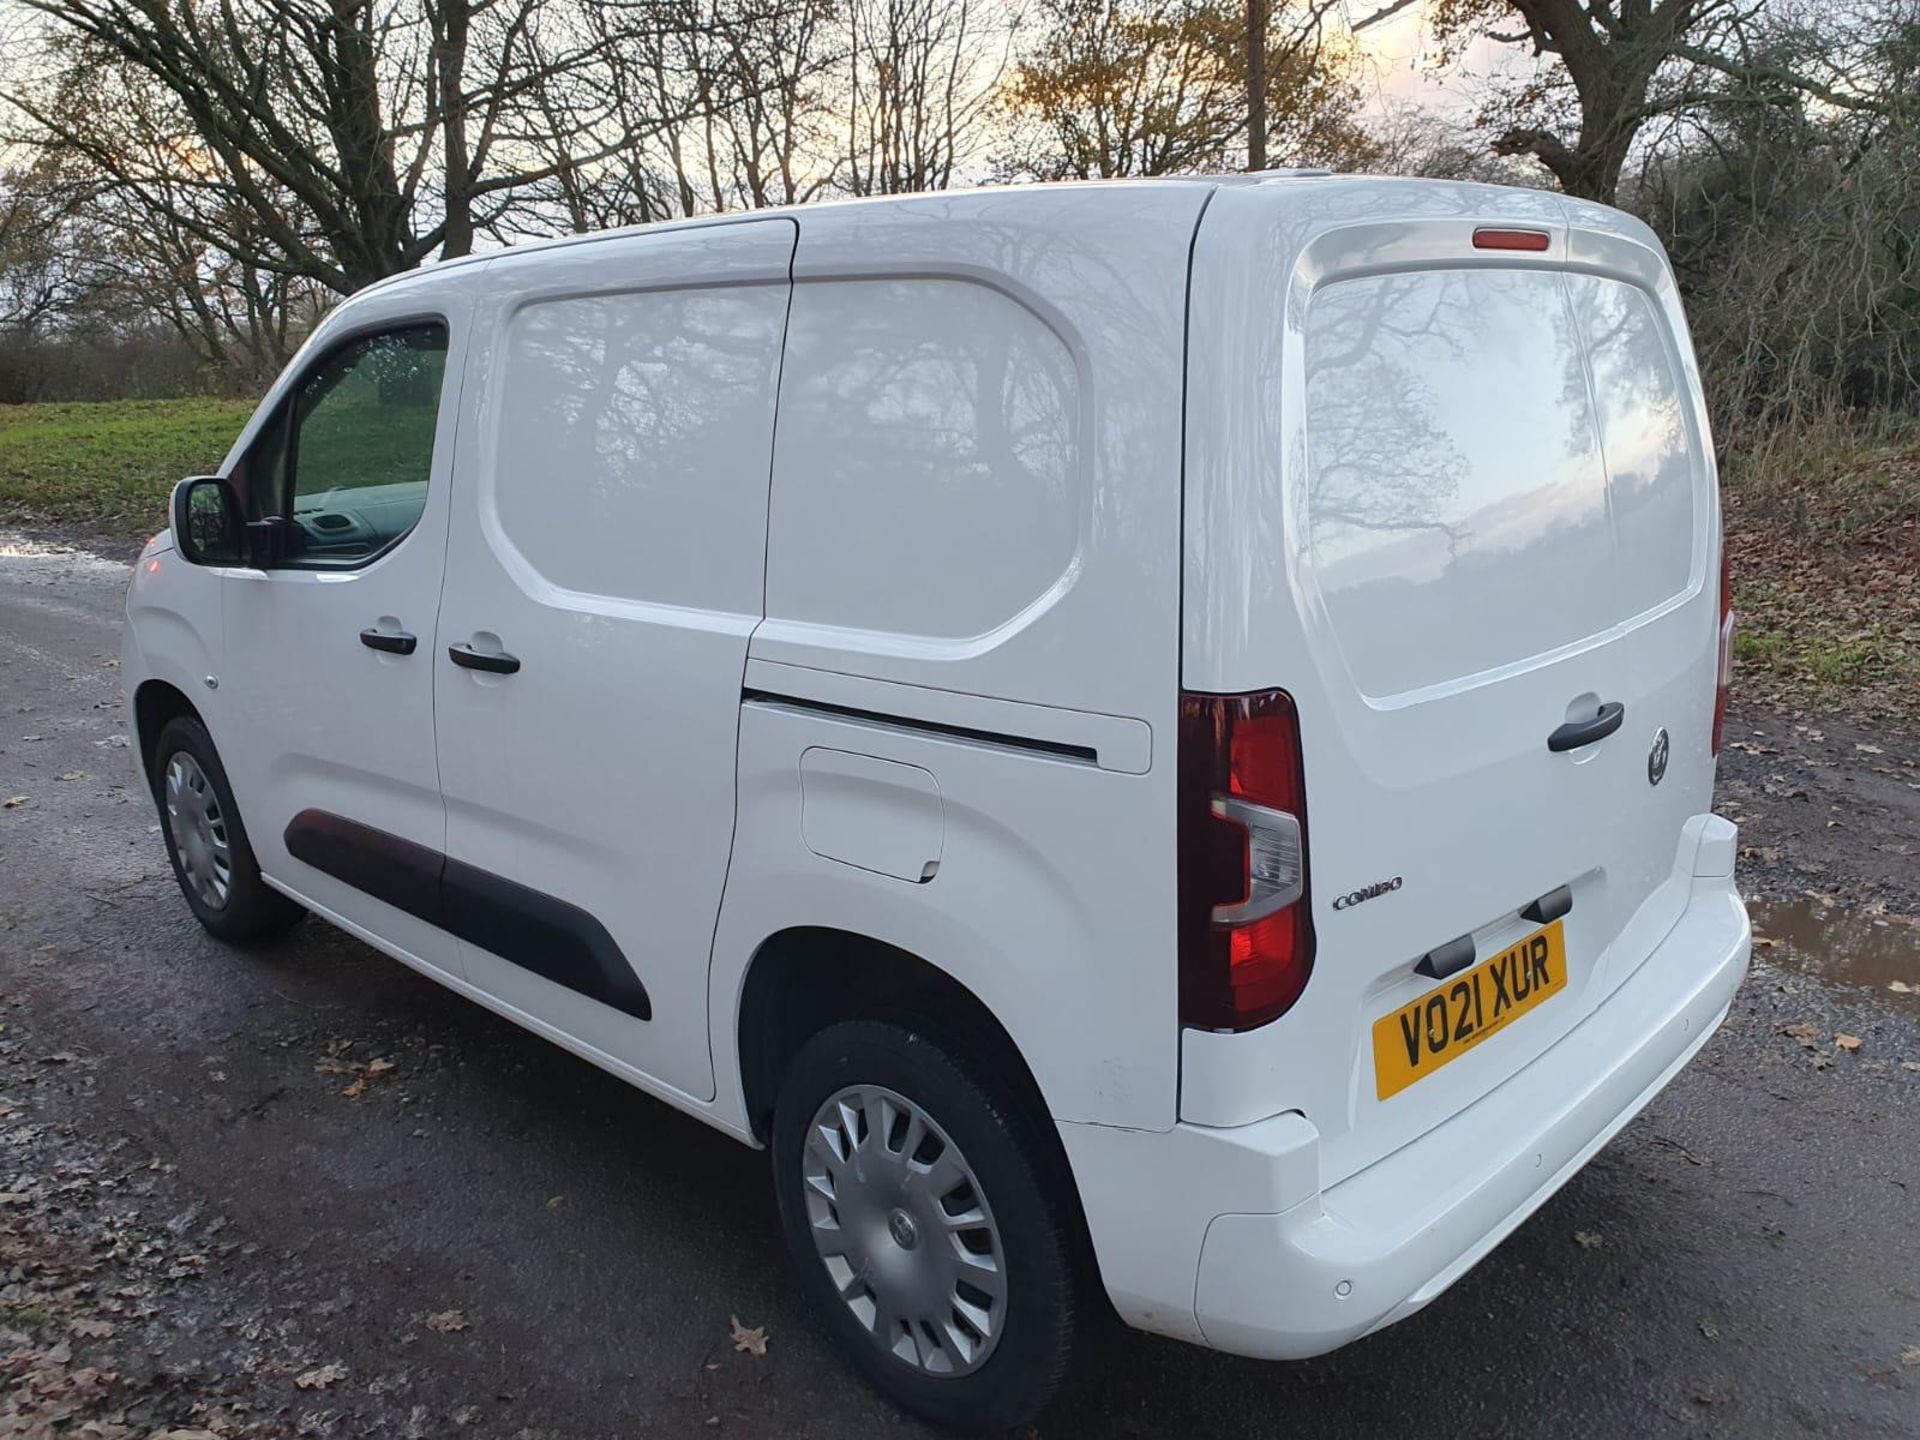 2021 21 Vauxhall combo sportive White panel van - 3 seats - air con - ply lined - 2 keys - VO21 XUR - Image 4 of 7